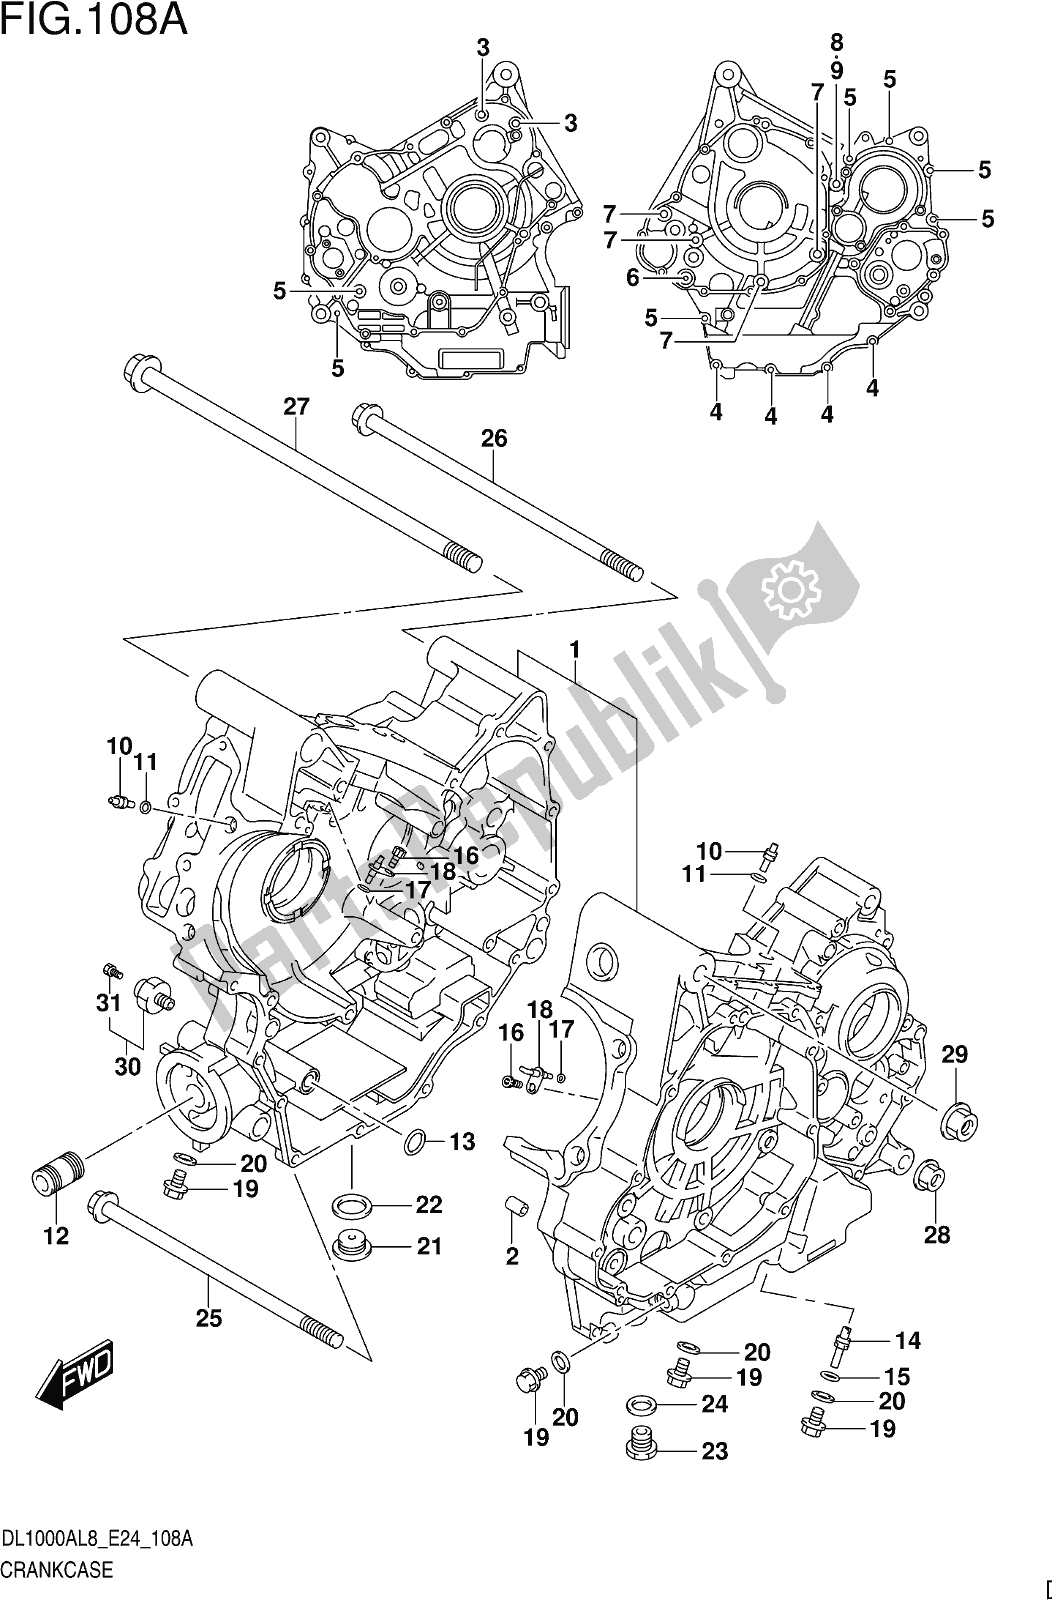 All parts for the Fig. 108a Crankcase of the Suzuki DL 1000 XA 2018